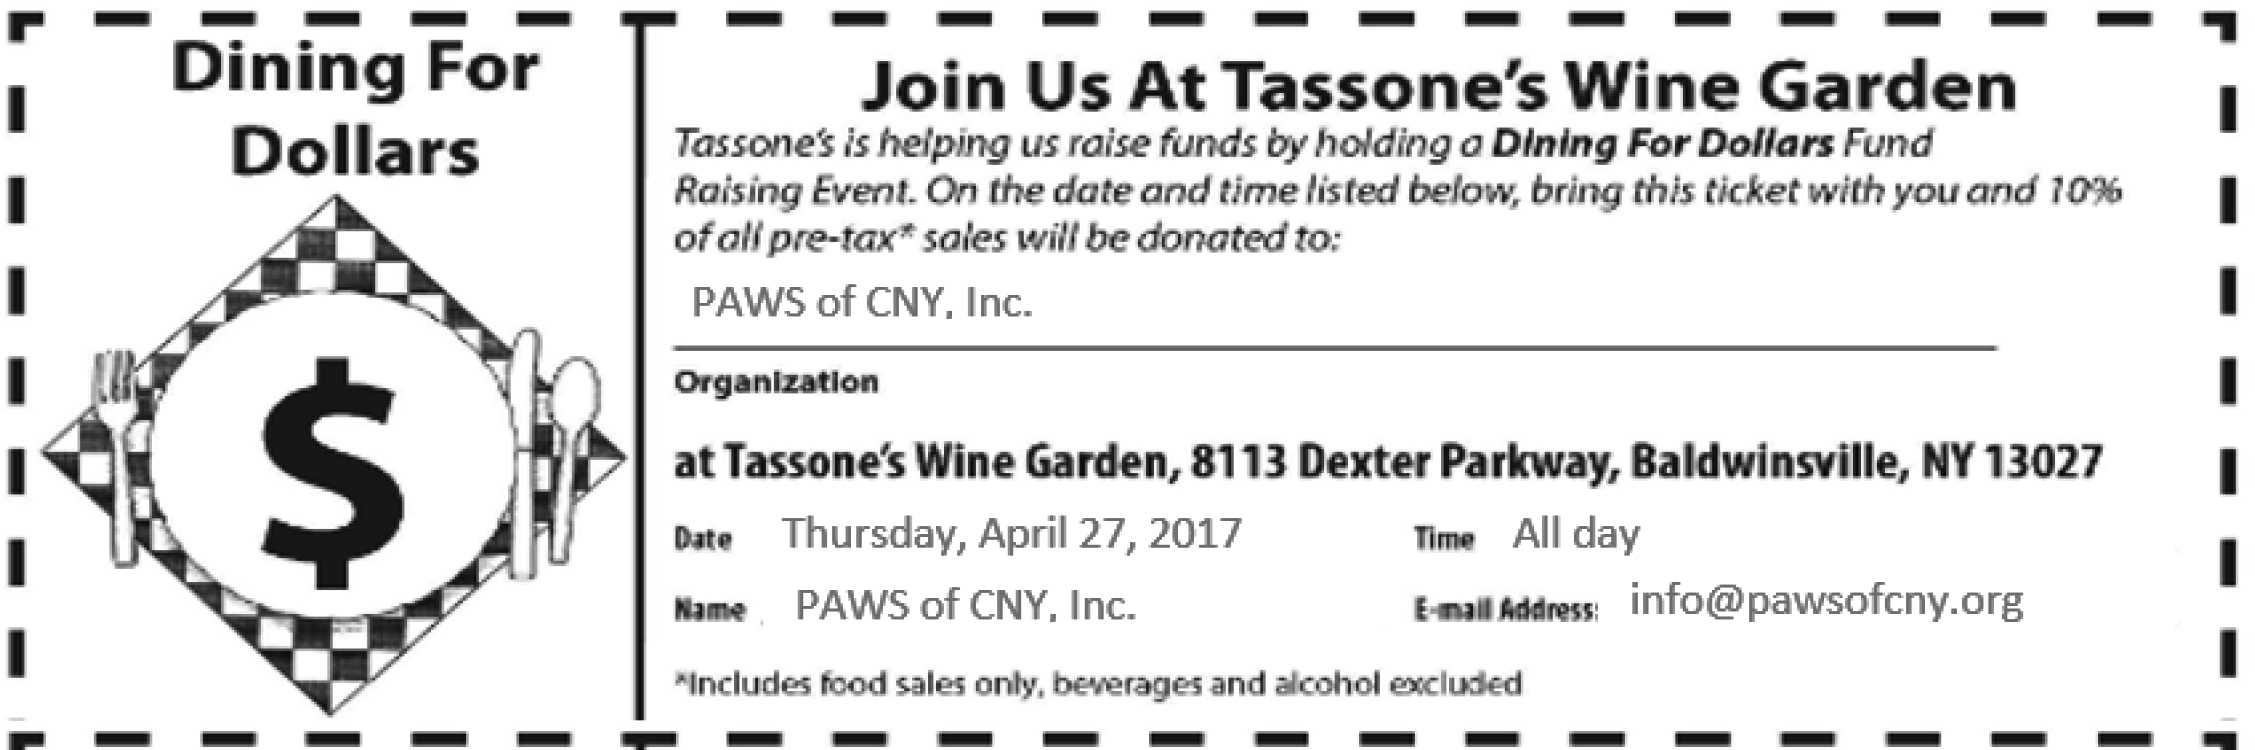 PAWS_of_CNY_Dining_for_Dollars_Coupon